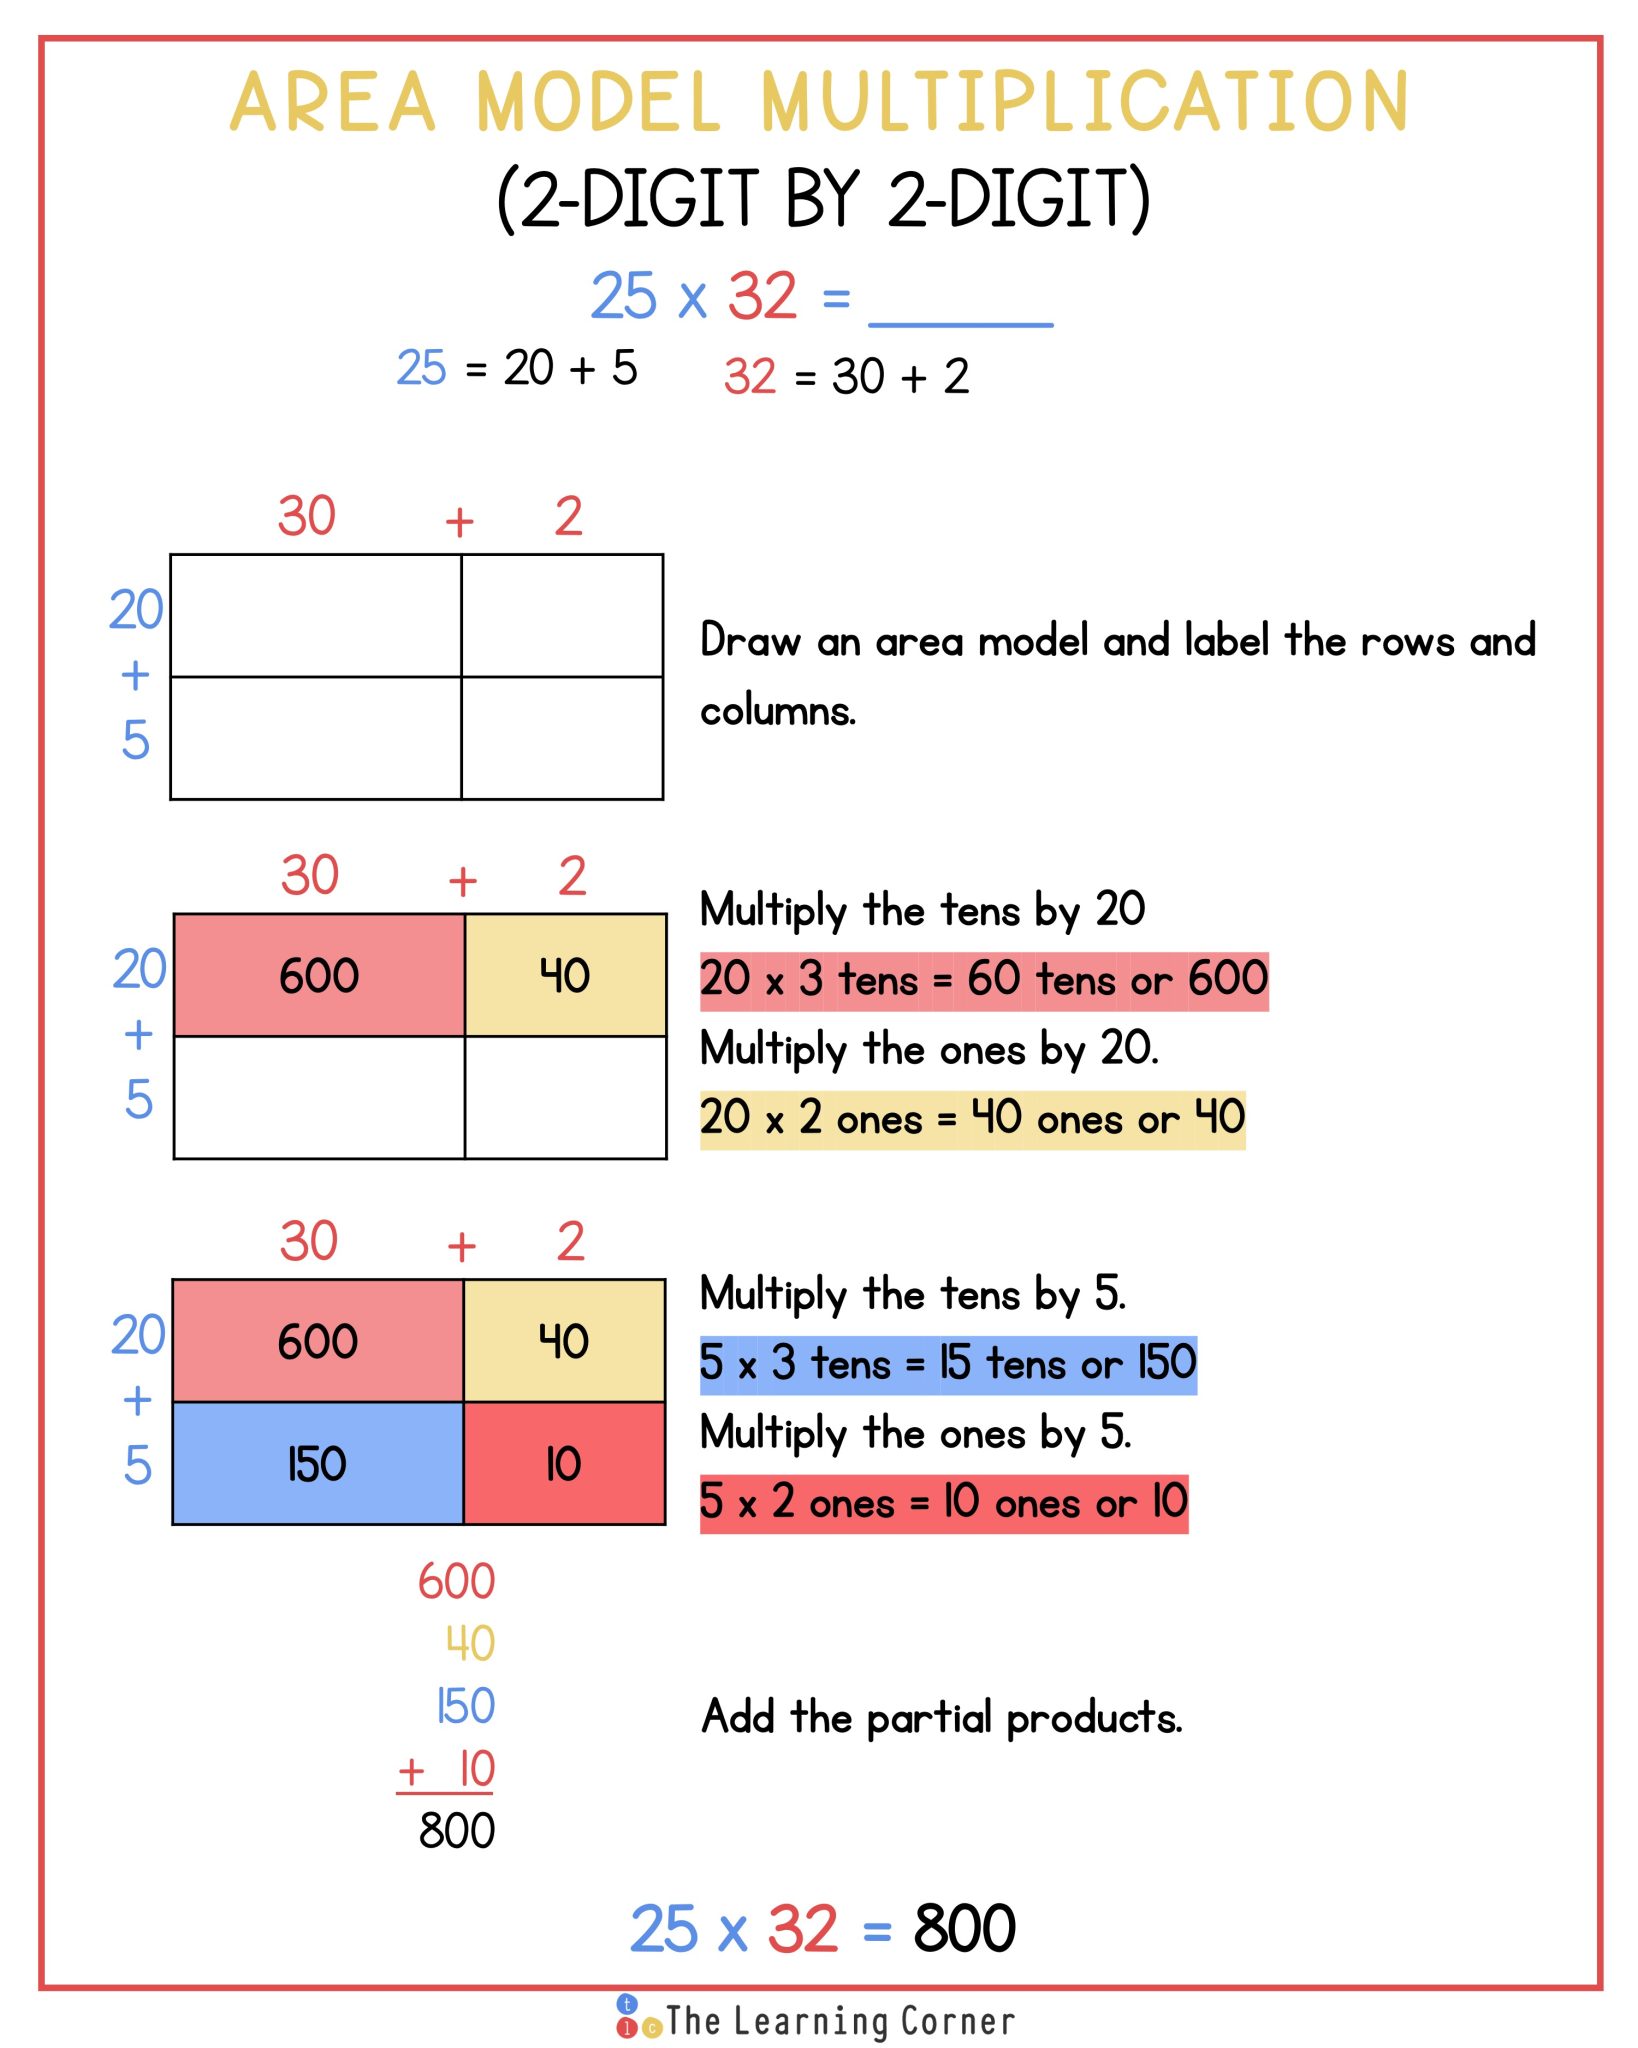 Area Model Multiplication Guide and Examples